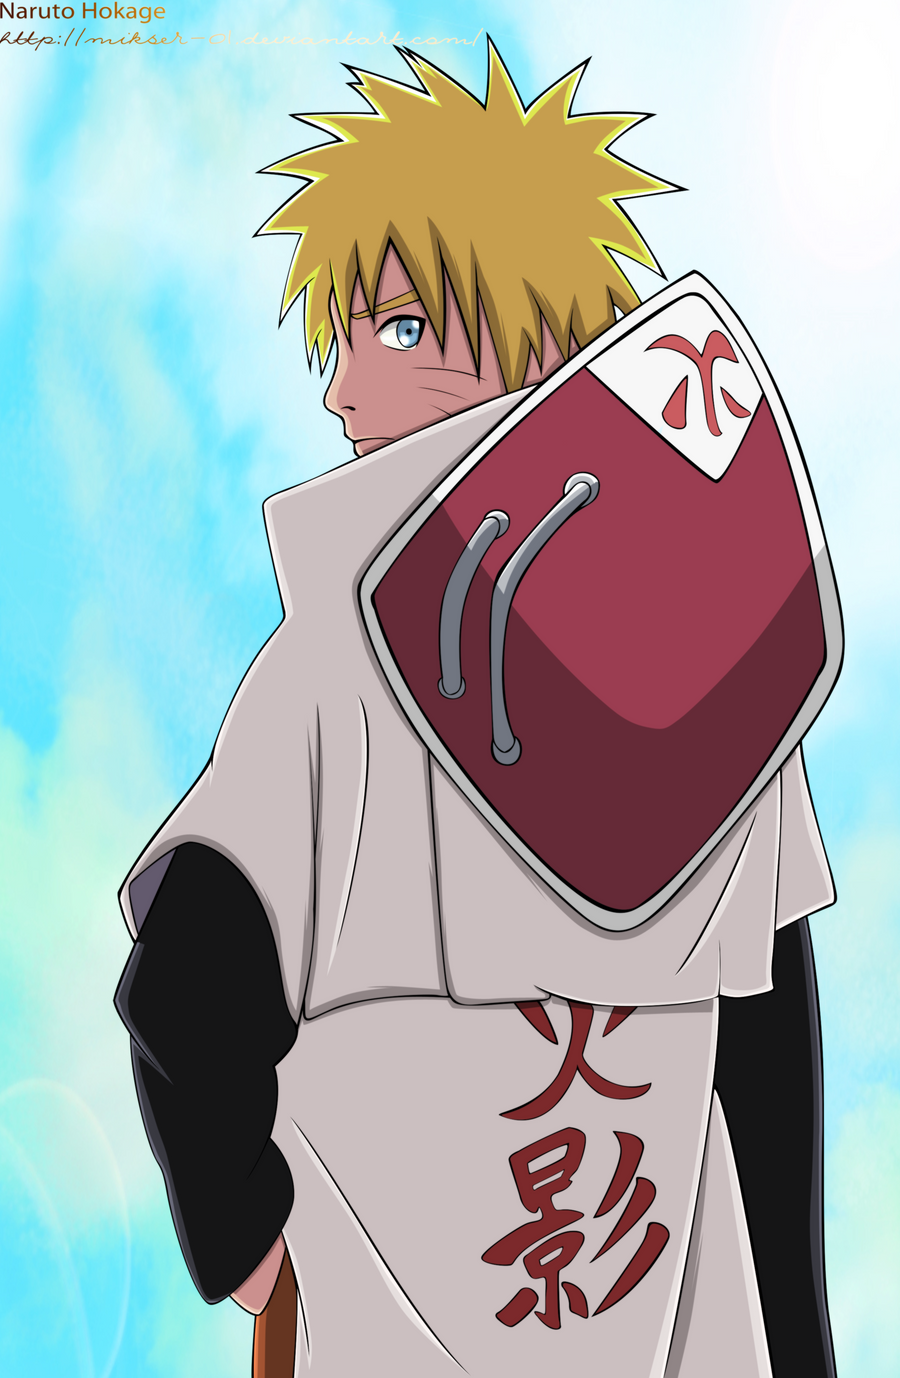 naruto_hokage_by_mikser_01-d3hrpnd.png